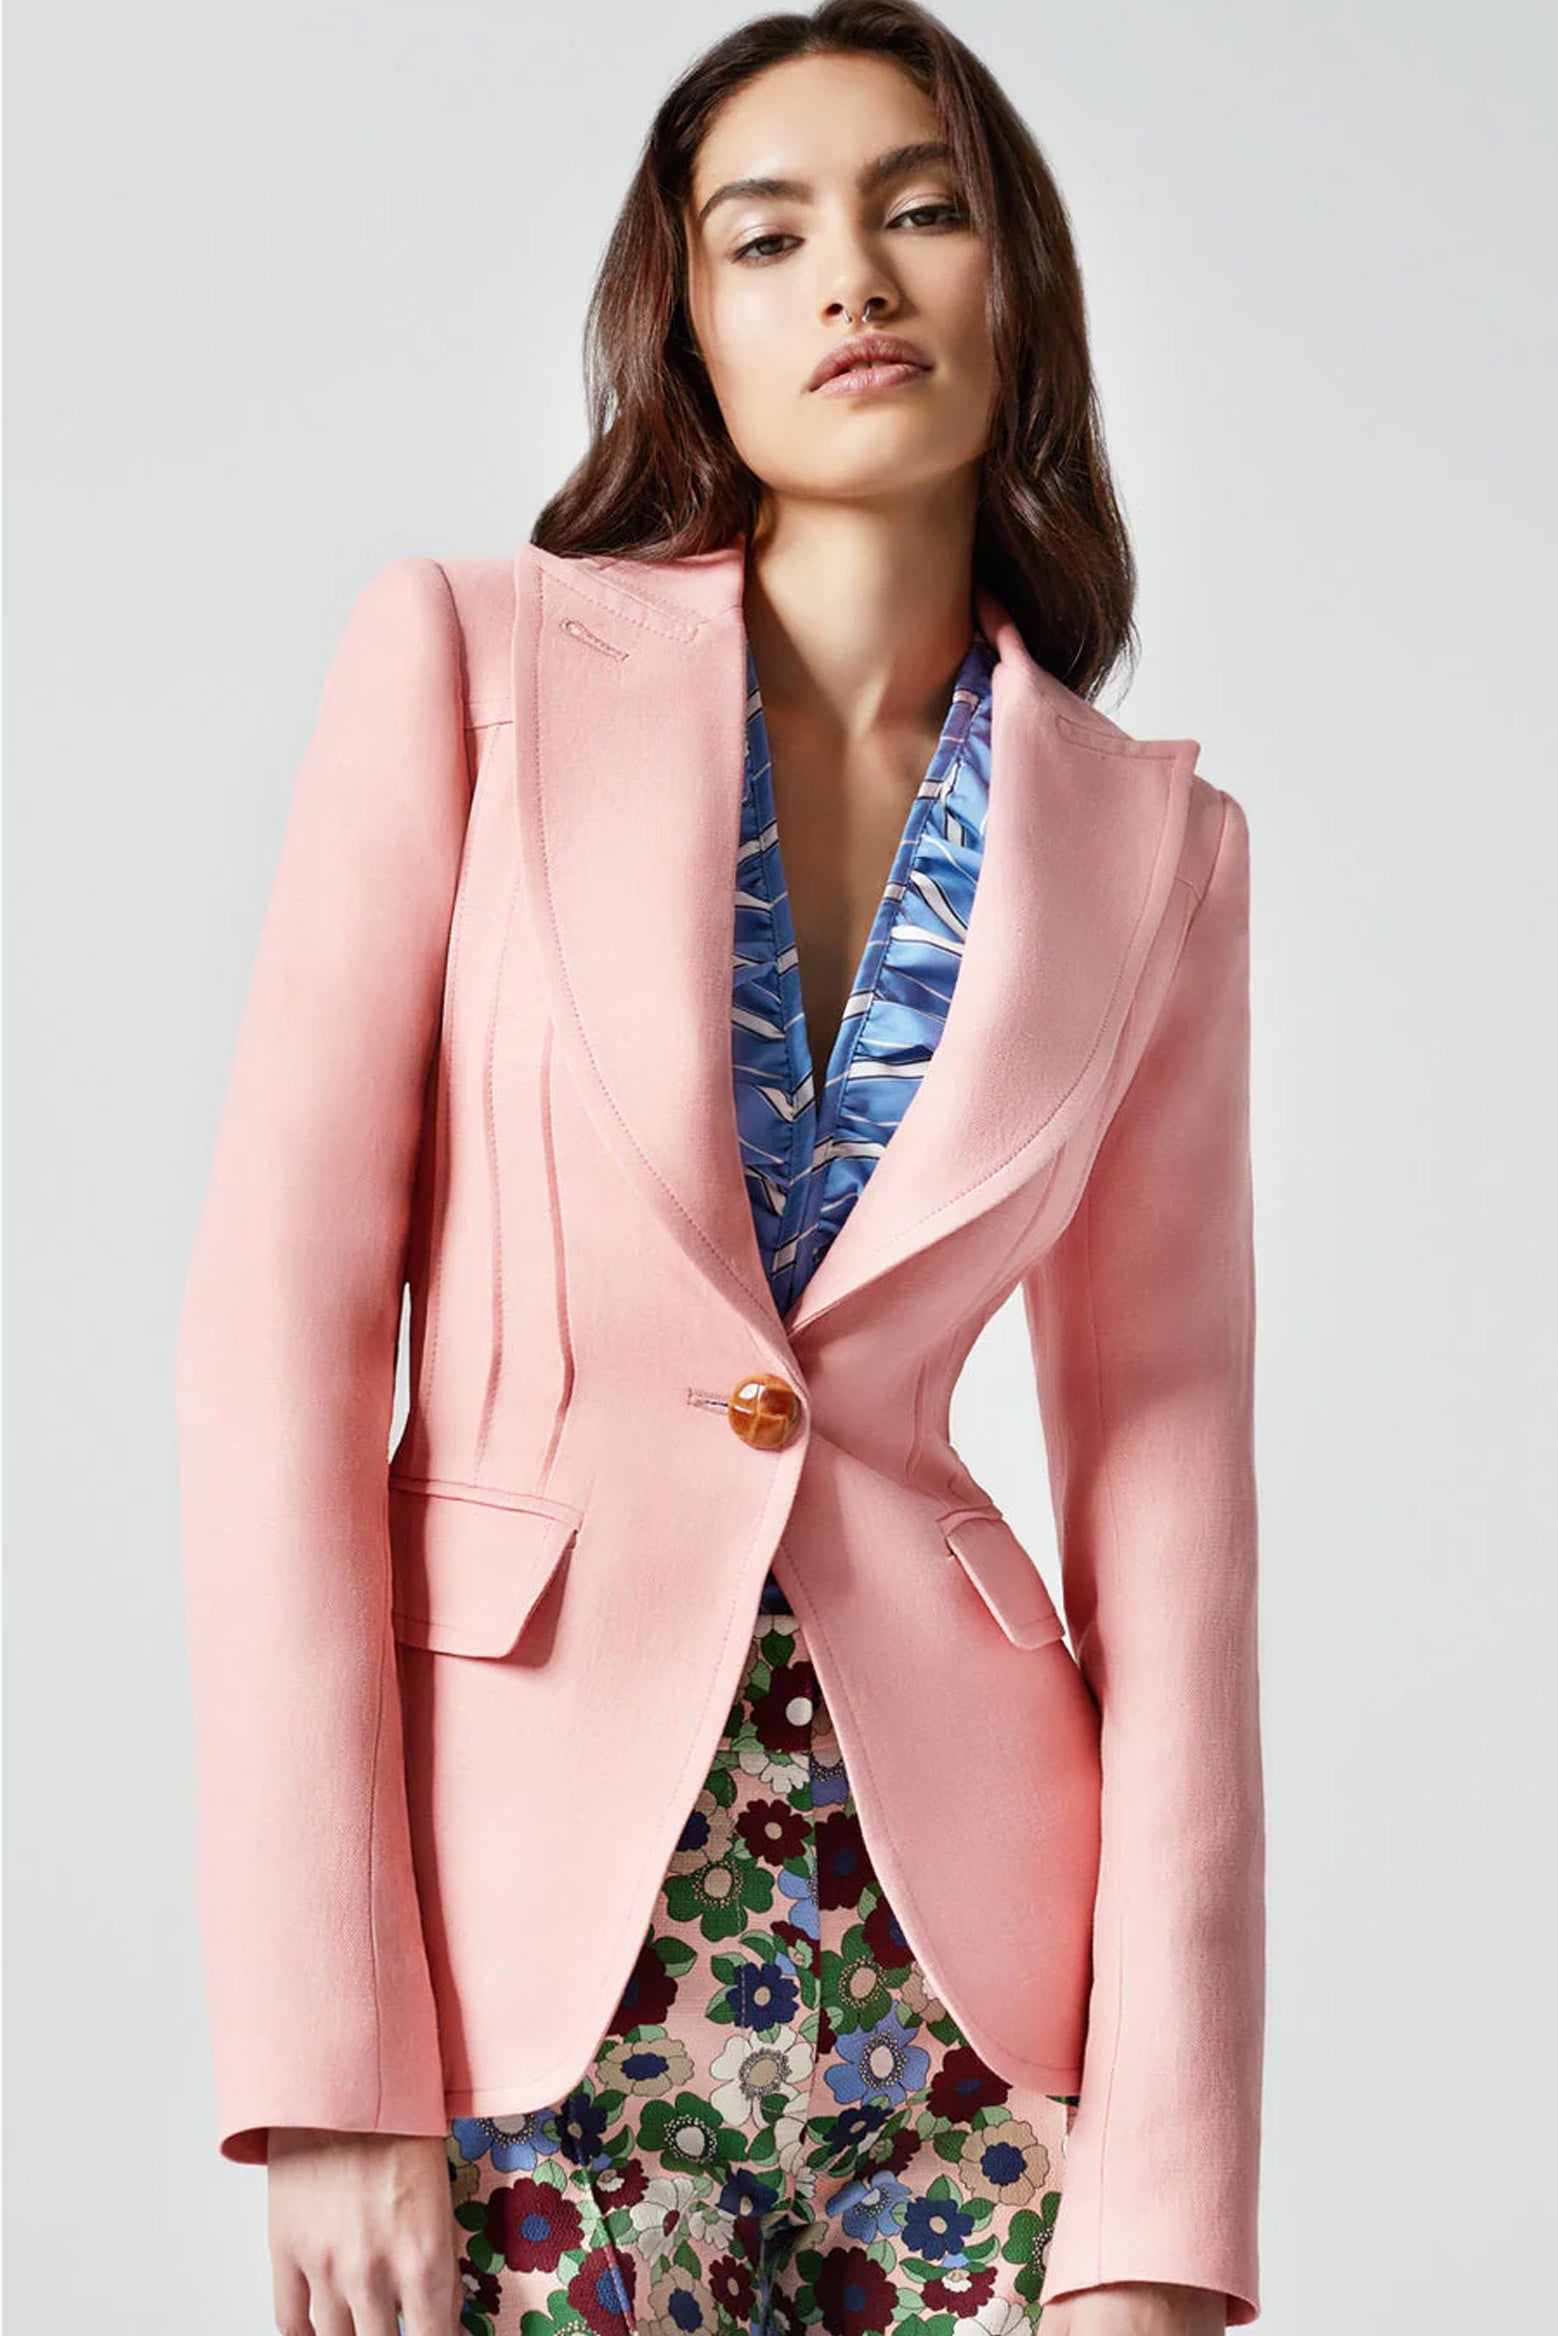 Smythe Pintuck Blazer in Chalk Pink available at TNT The New Trend Australia.